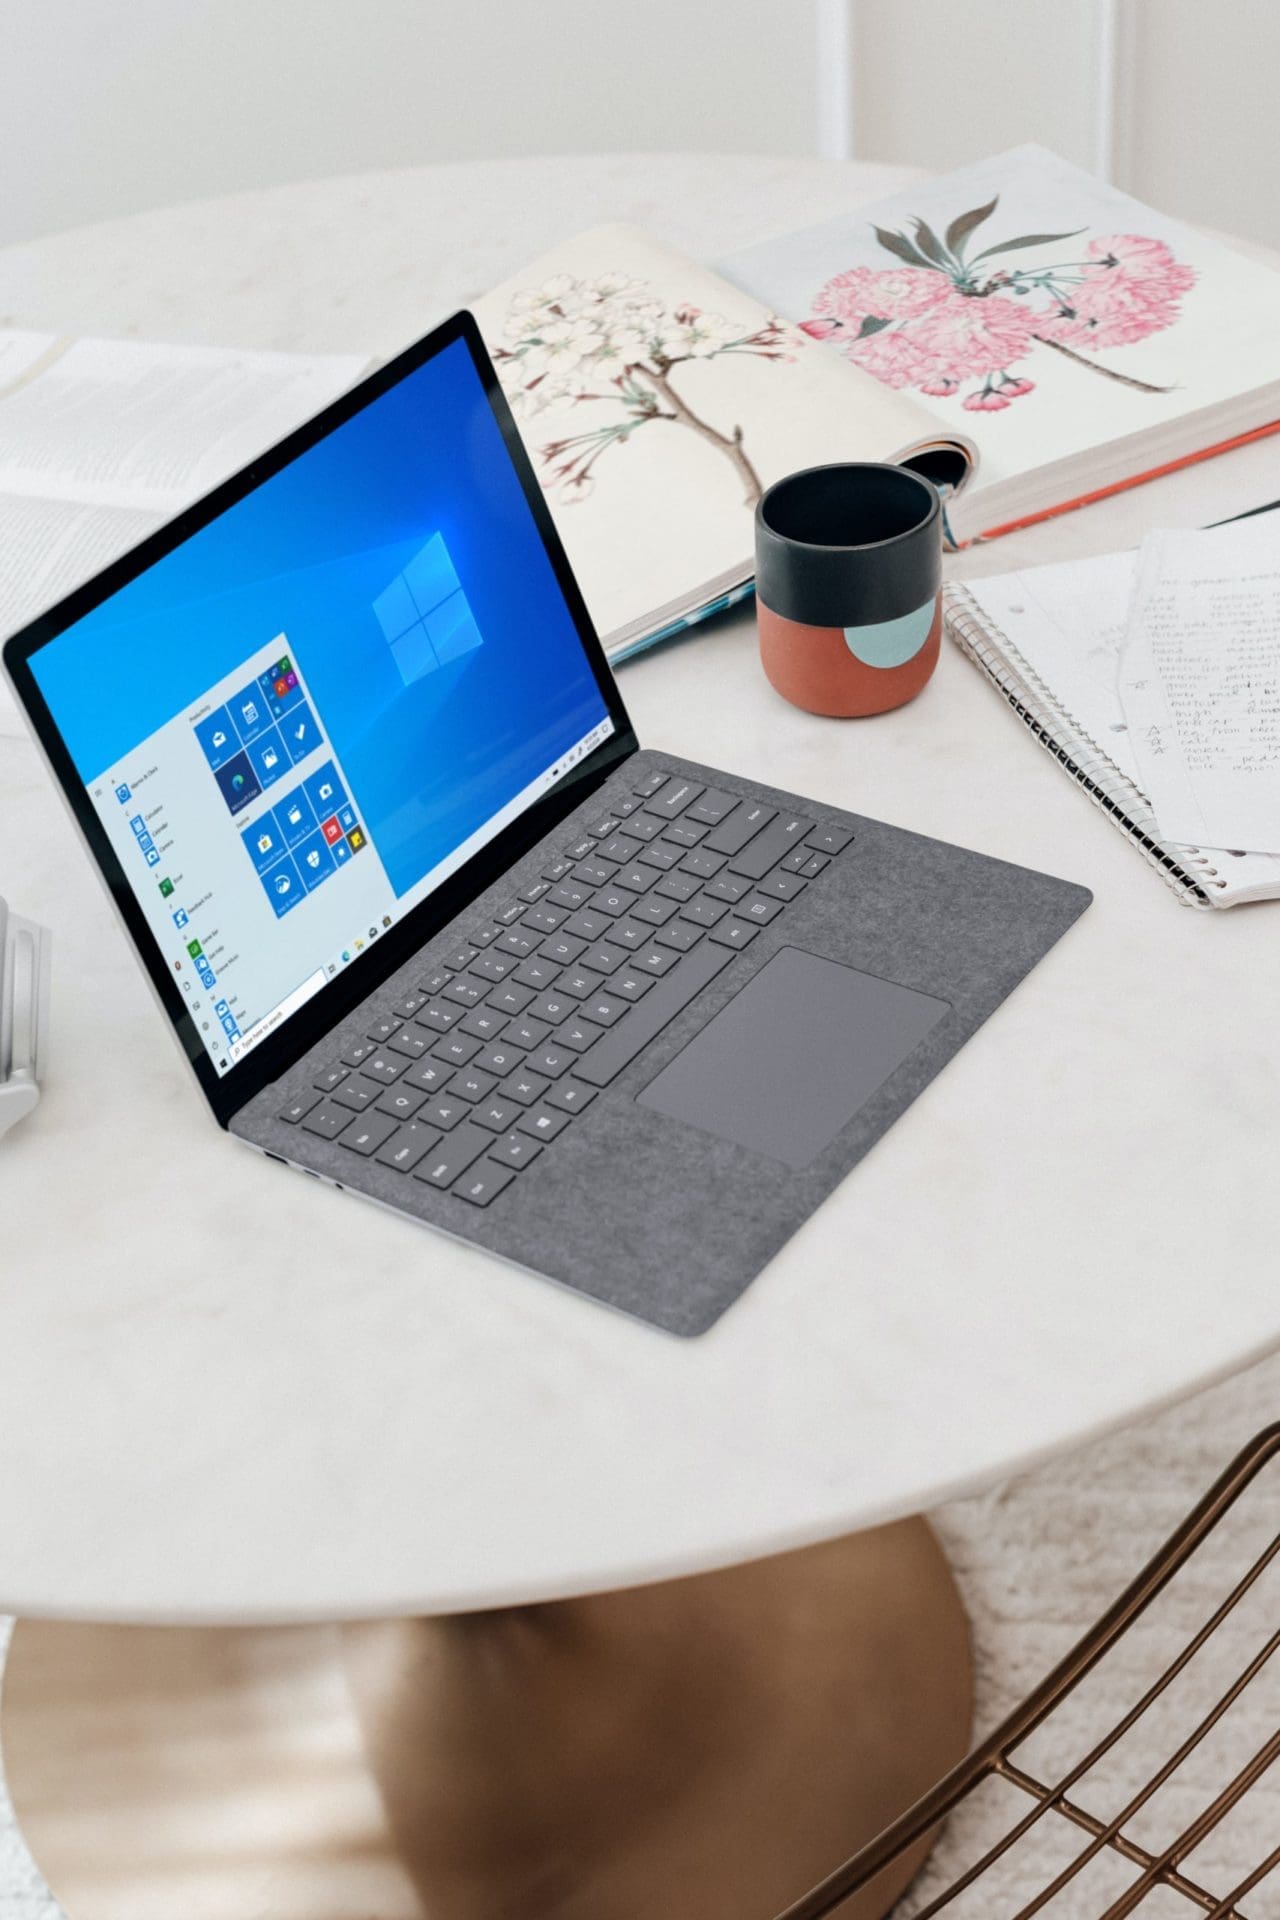 gray microsoft surface laptop computer on white table